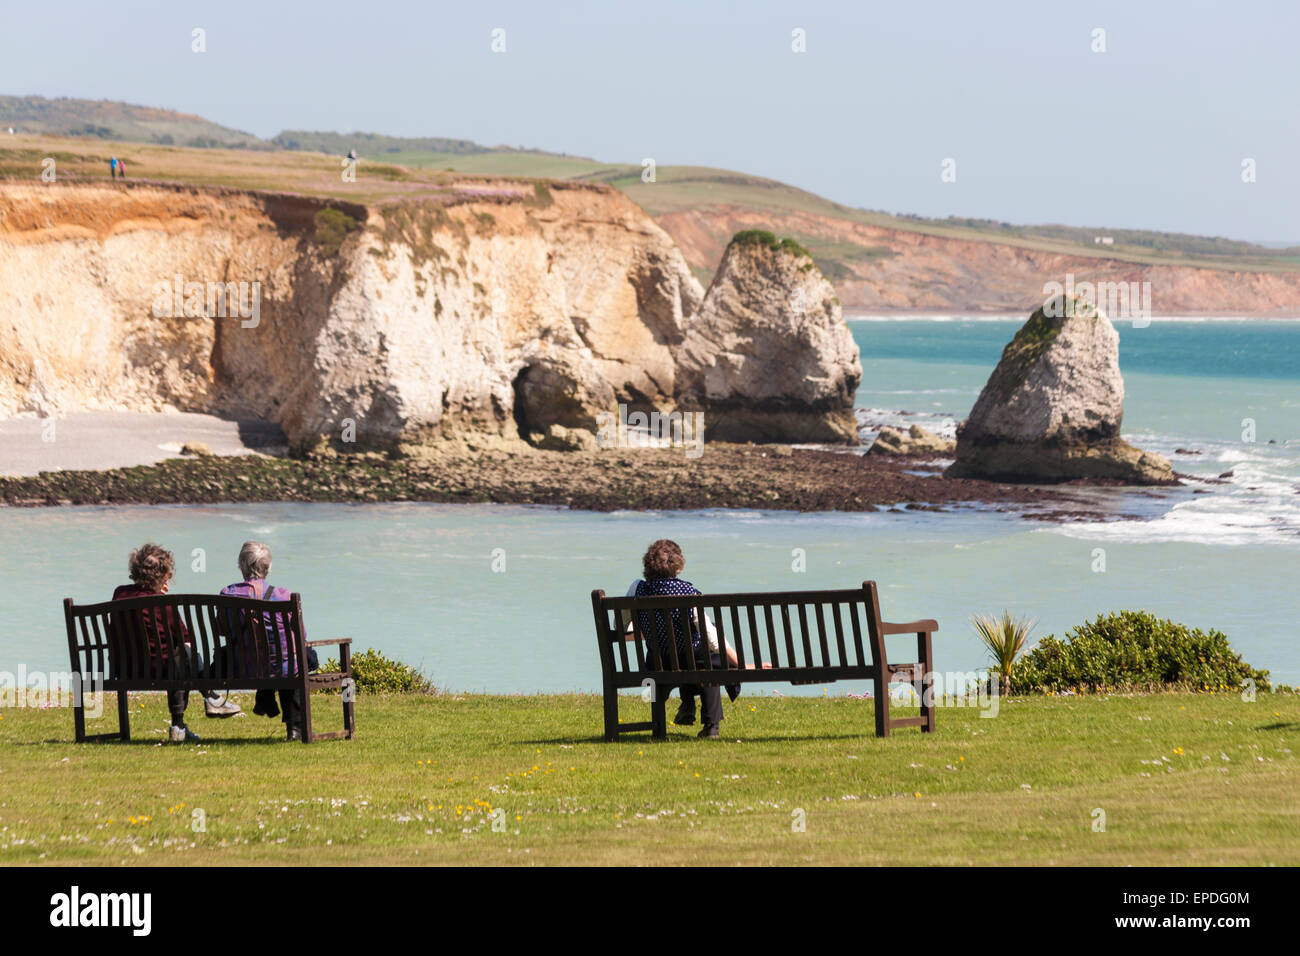 Women sitting on benches admiring the views at Freshwater Bay at Isle of Wight, Hampshire UK in May - seastacks sea stacks Stock Photo